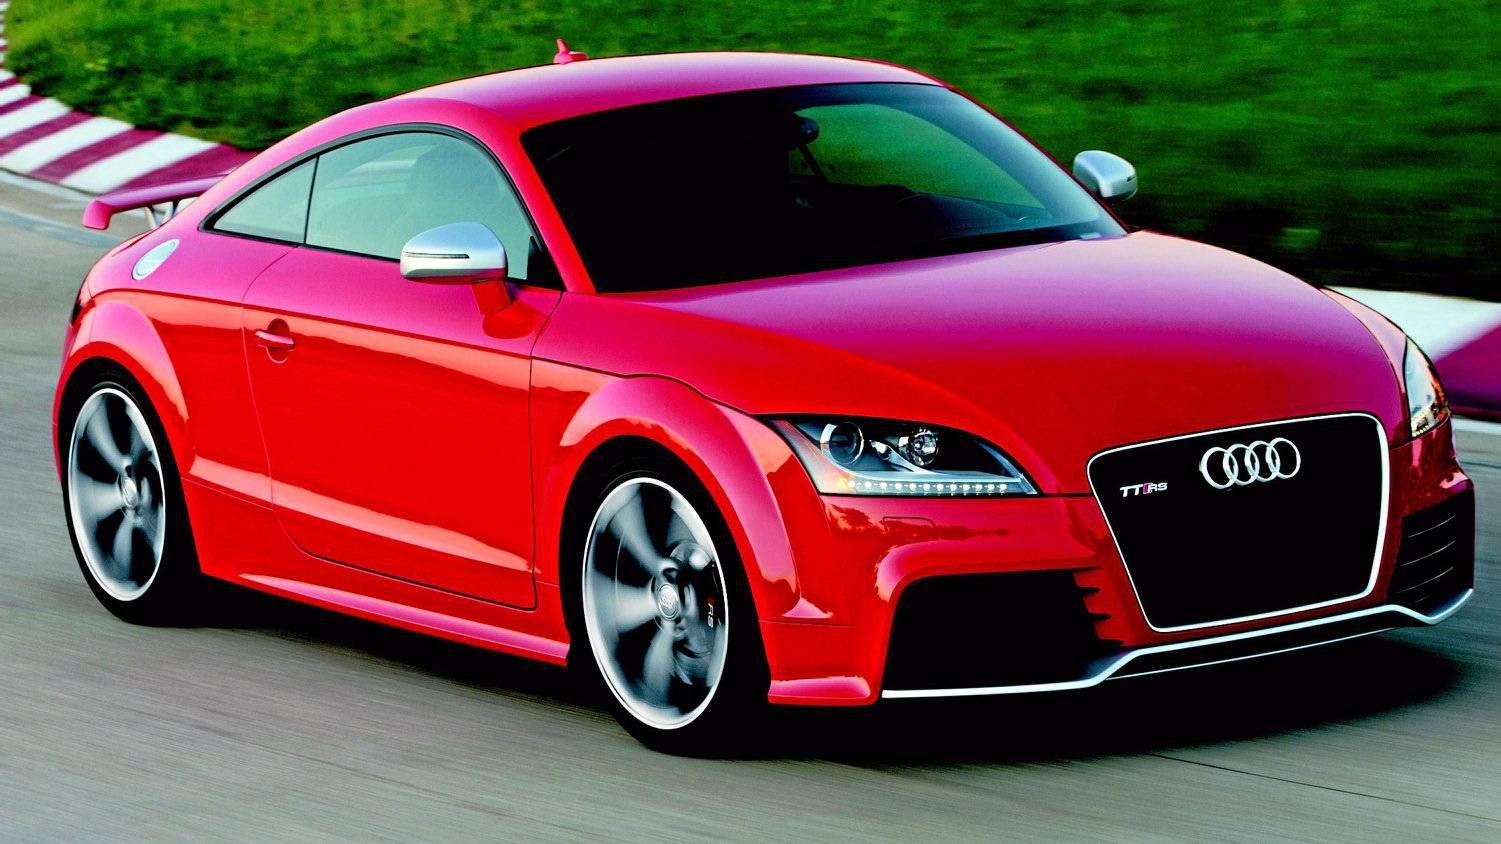 Review: Audi TT RS: All the fun at half the price - The Globe and Mail